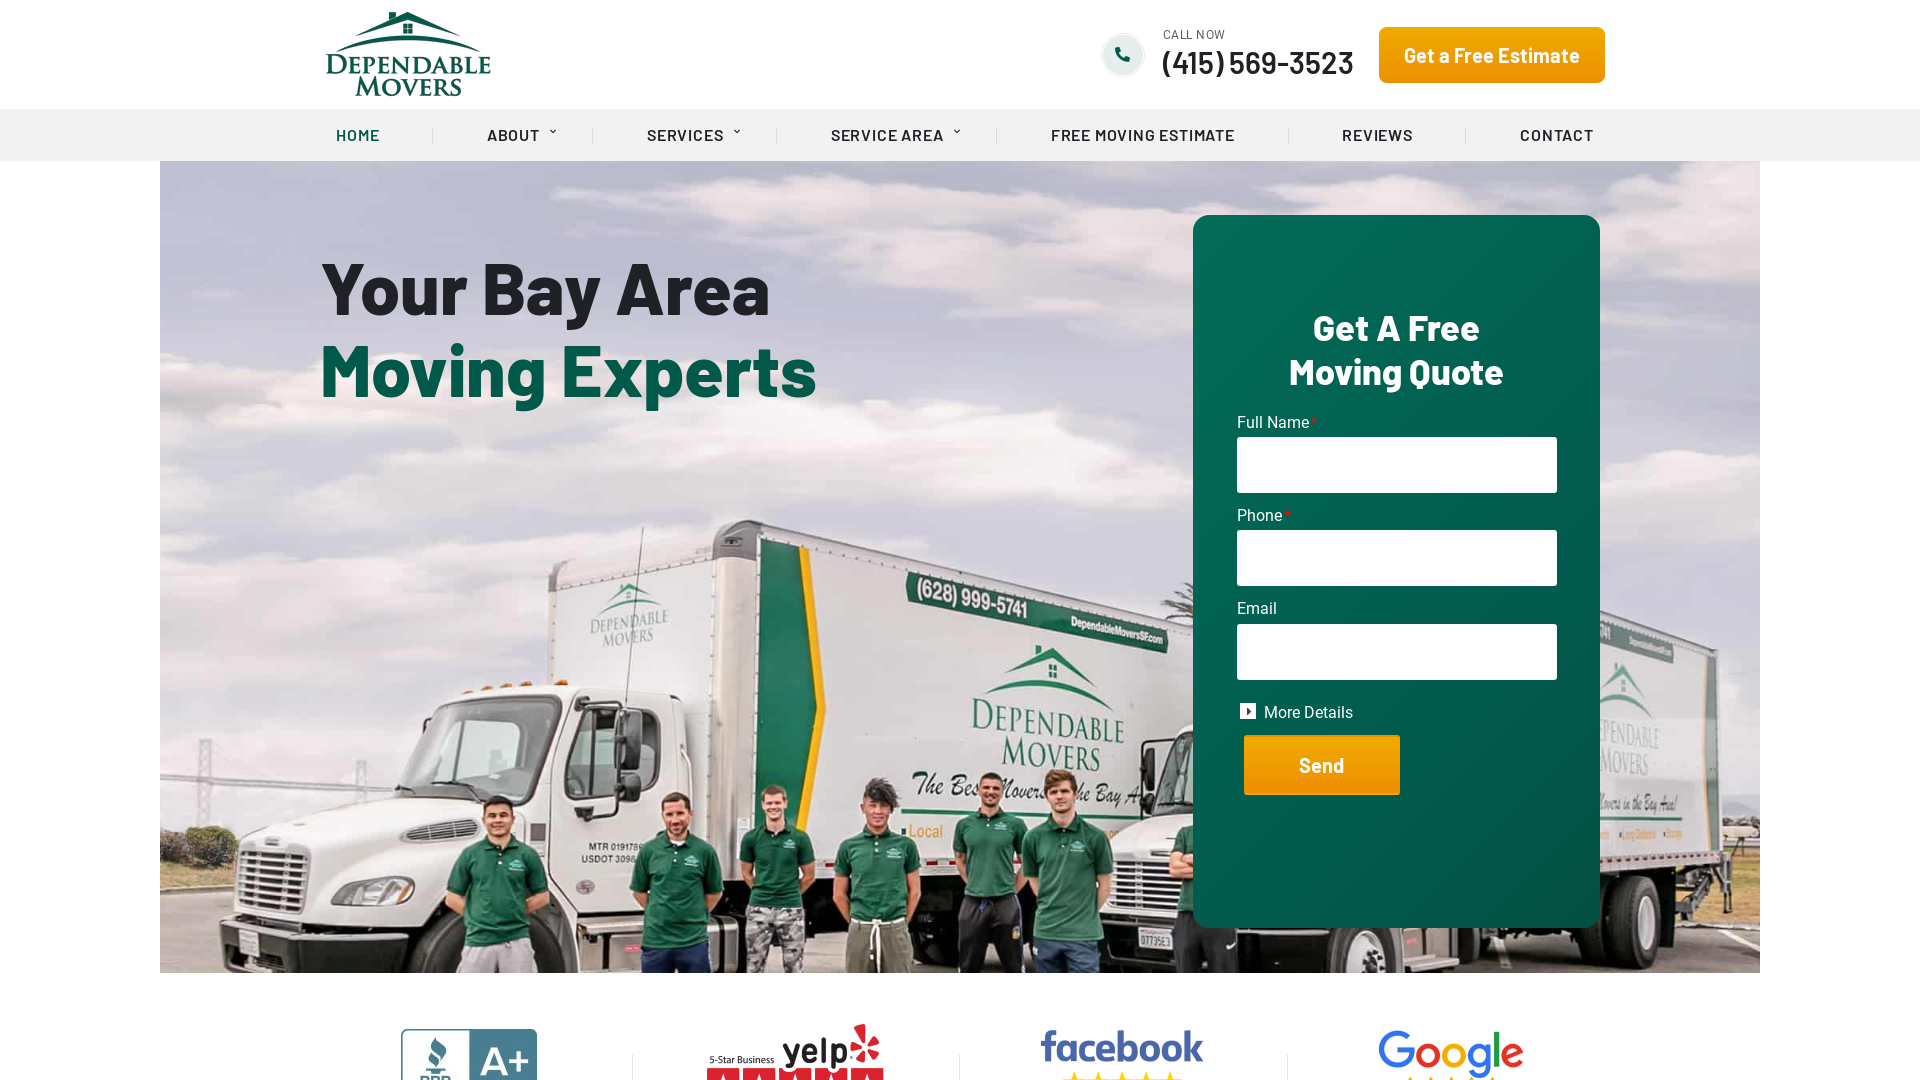 Dependable Movers SF